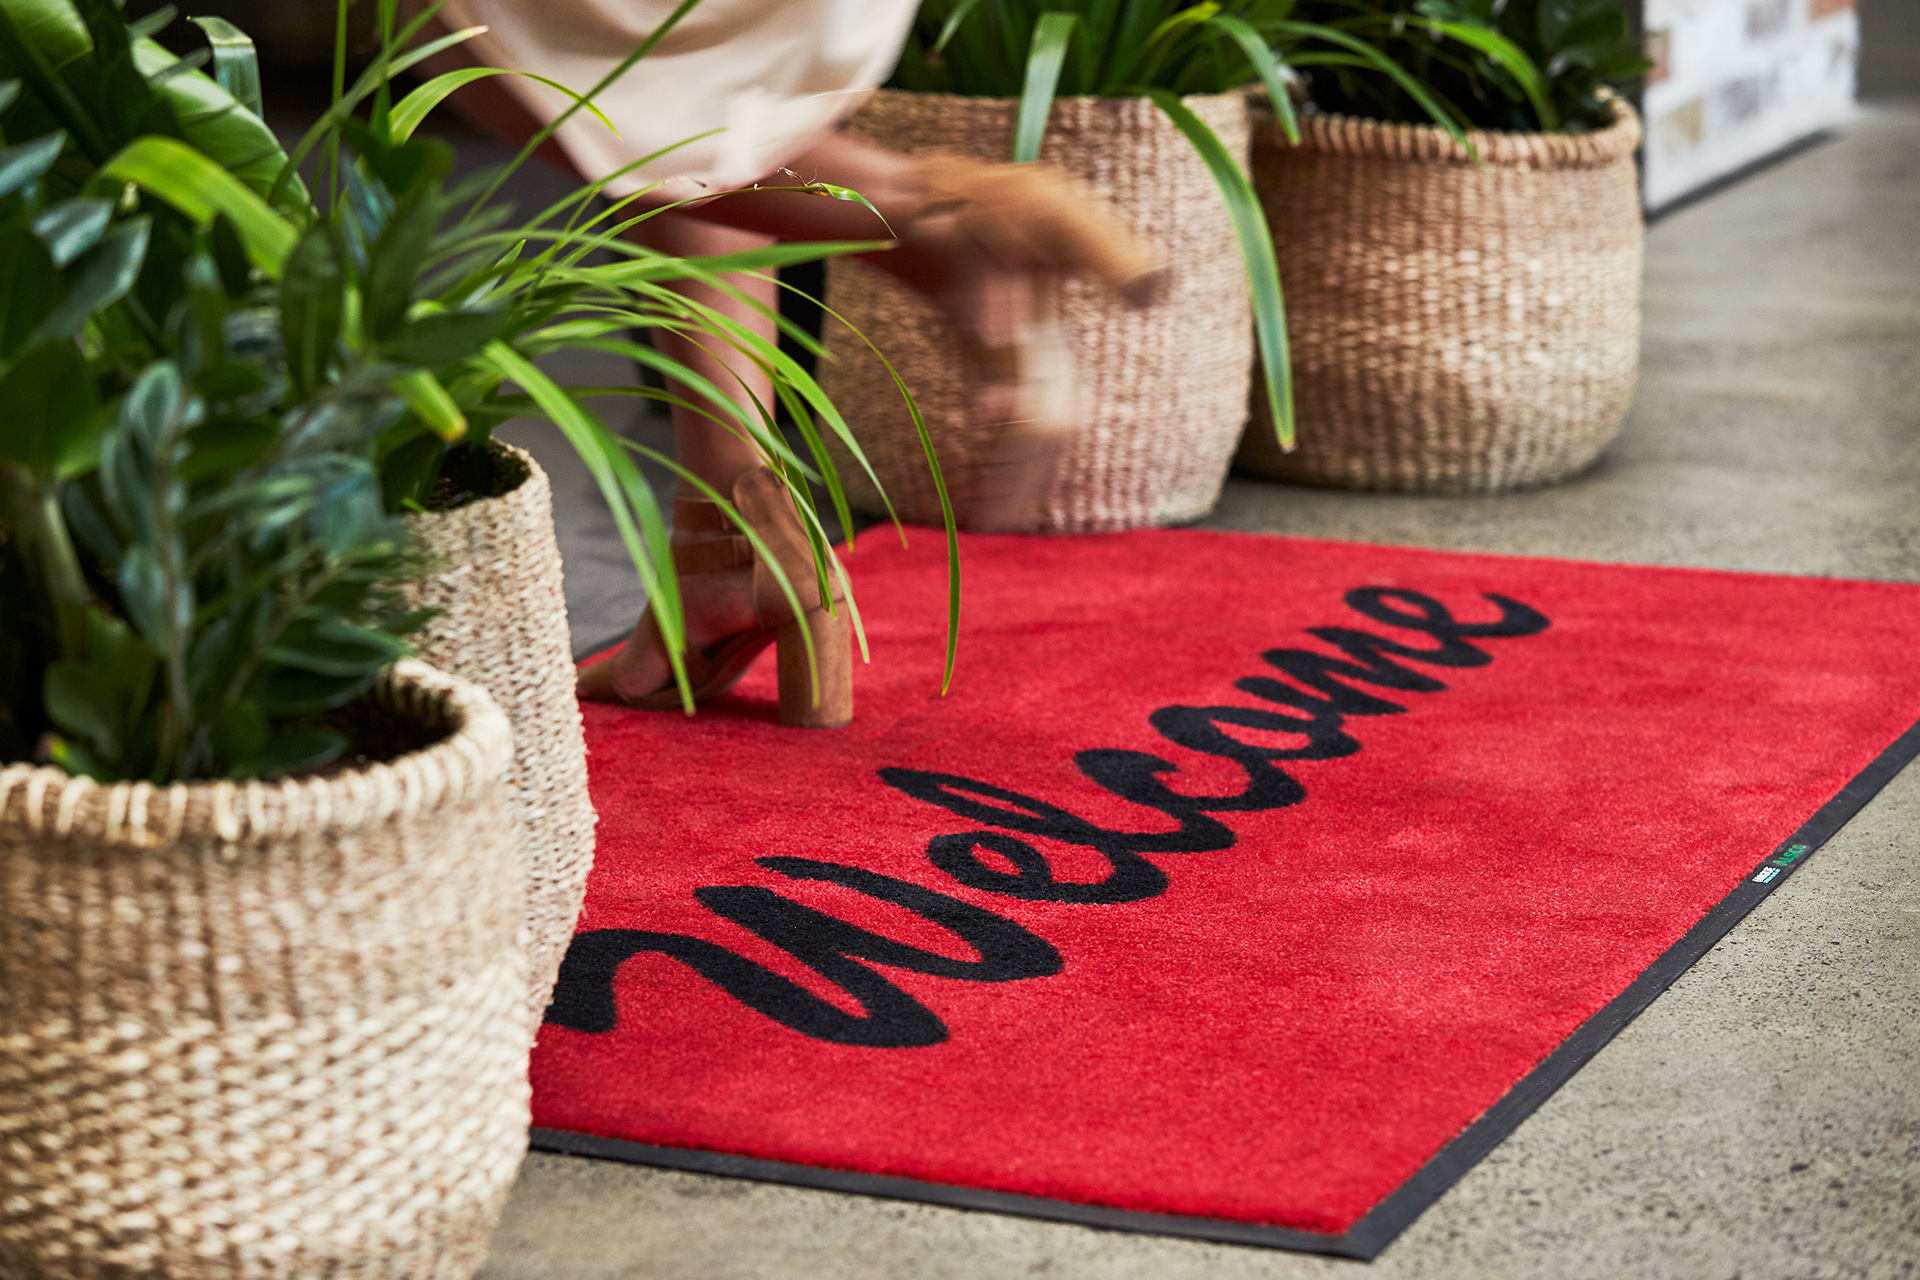 What types of floor mats does your facility need?